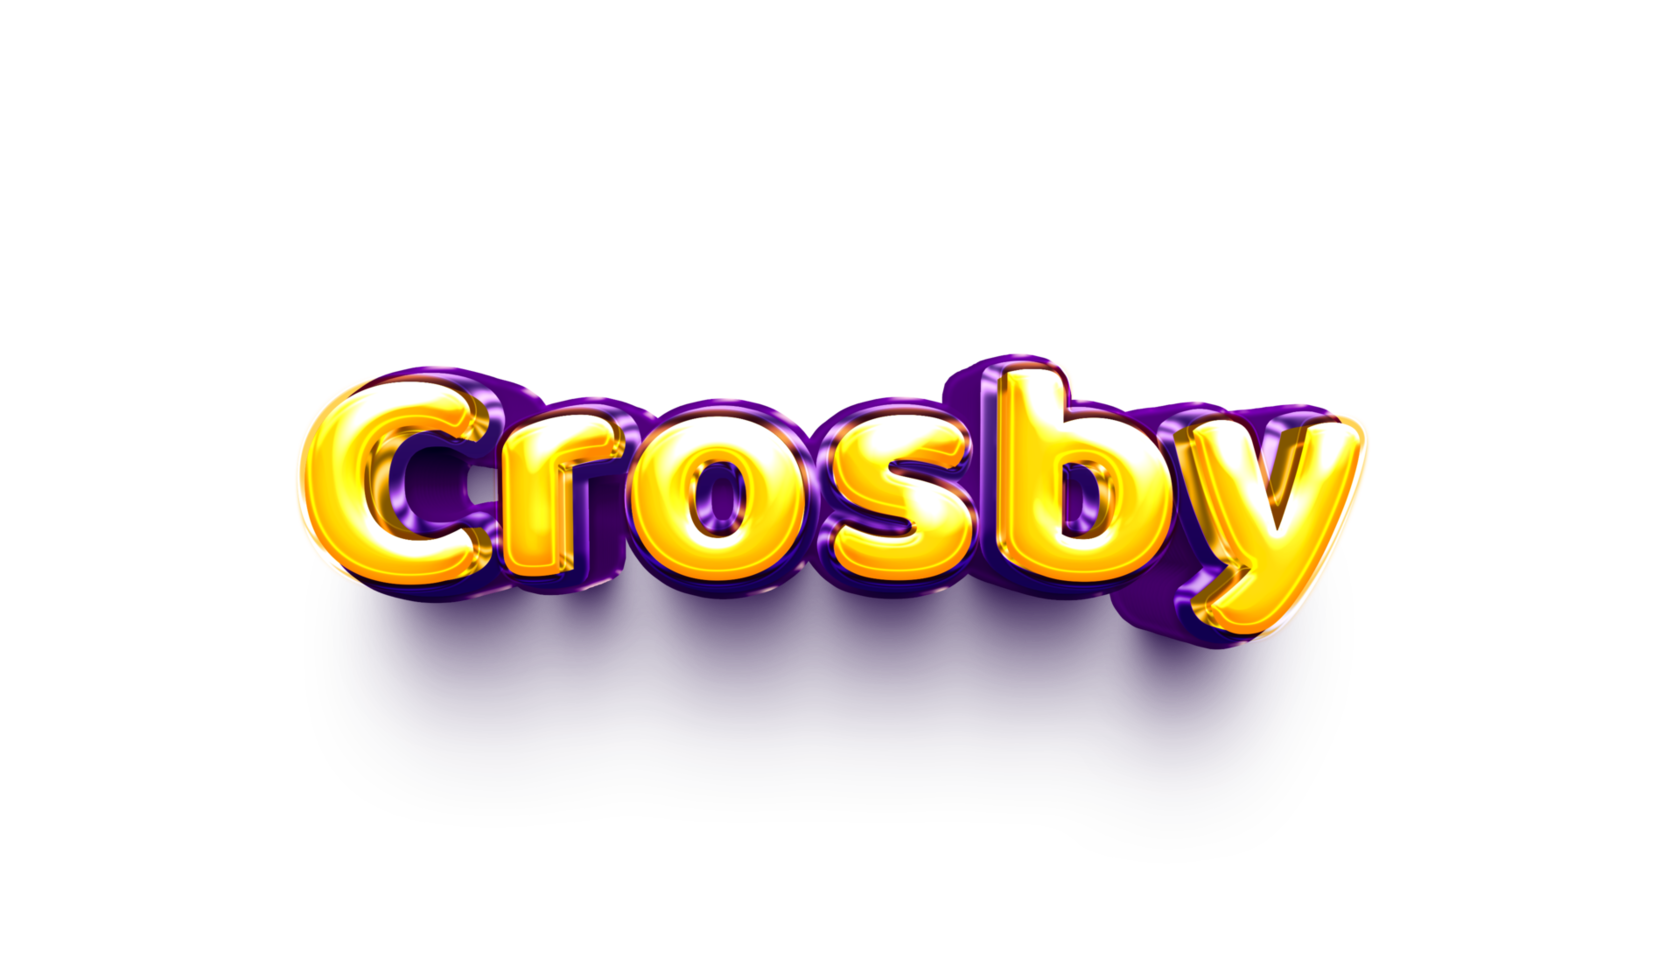 names of boy English helium balloon shiny celebration sticker 3d inflated Crosby Crosby png